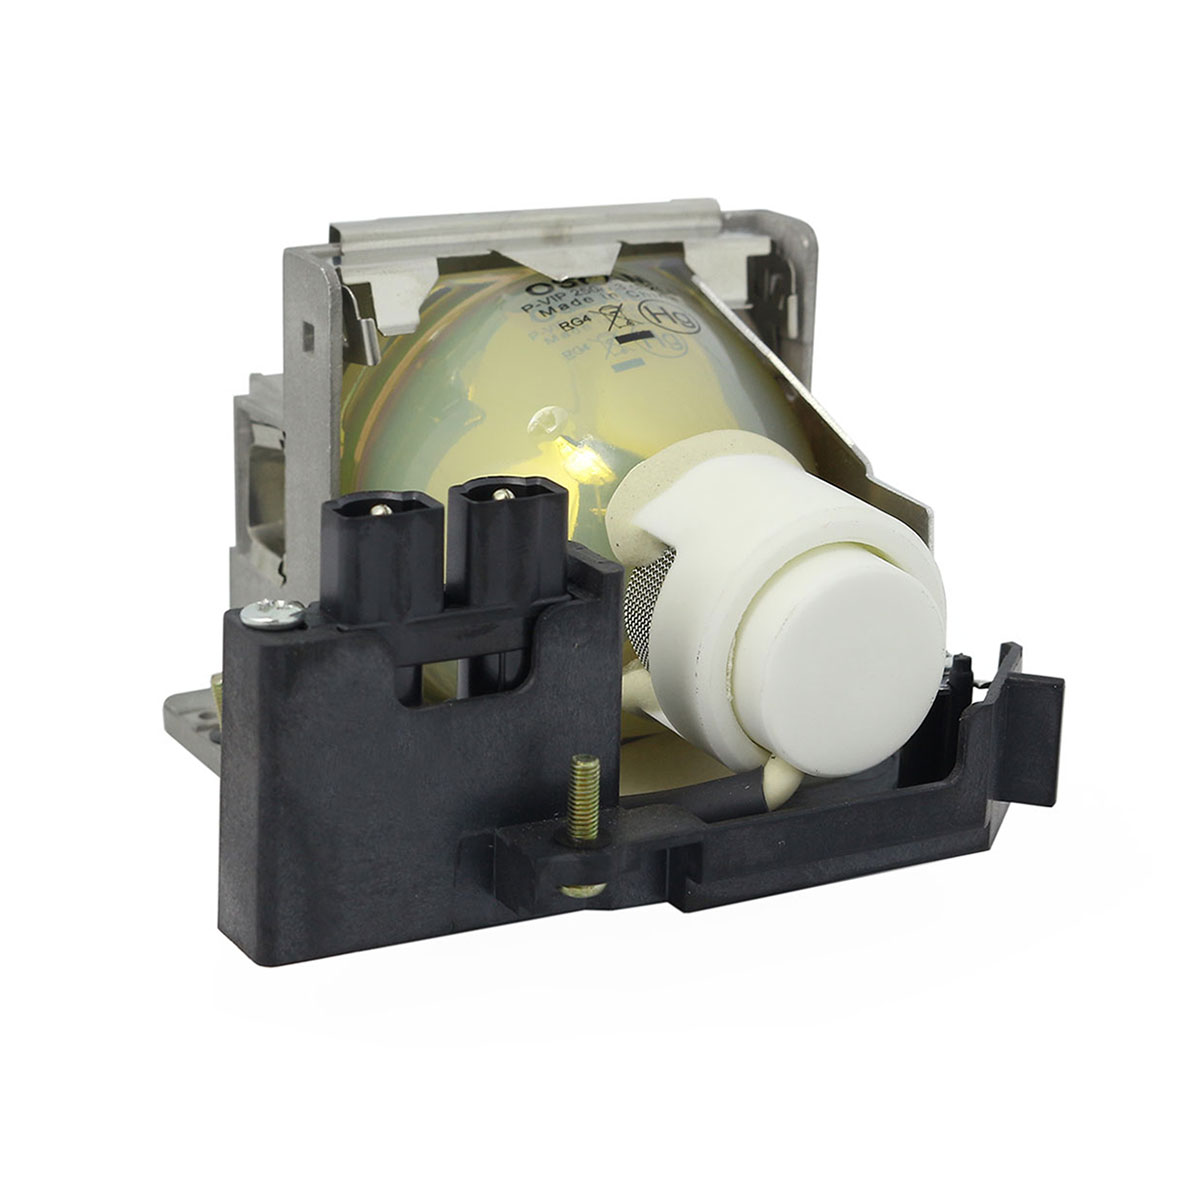 Osram PVIP Replacement Lamp & Housing for the Mitsubishi LVP-XD480U Projector - image 5 of 6